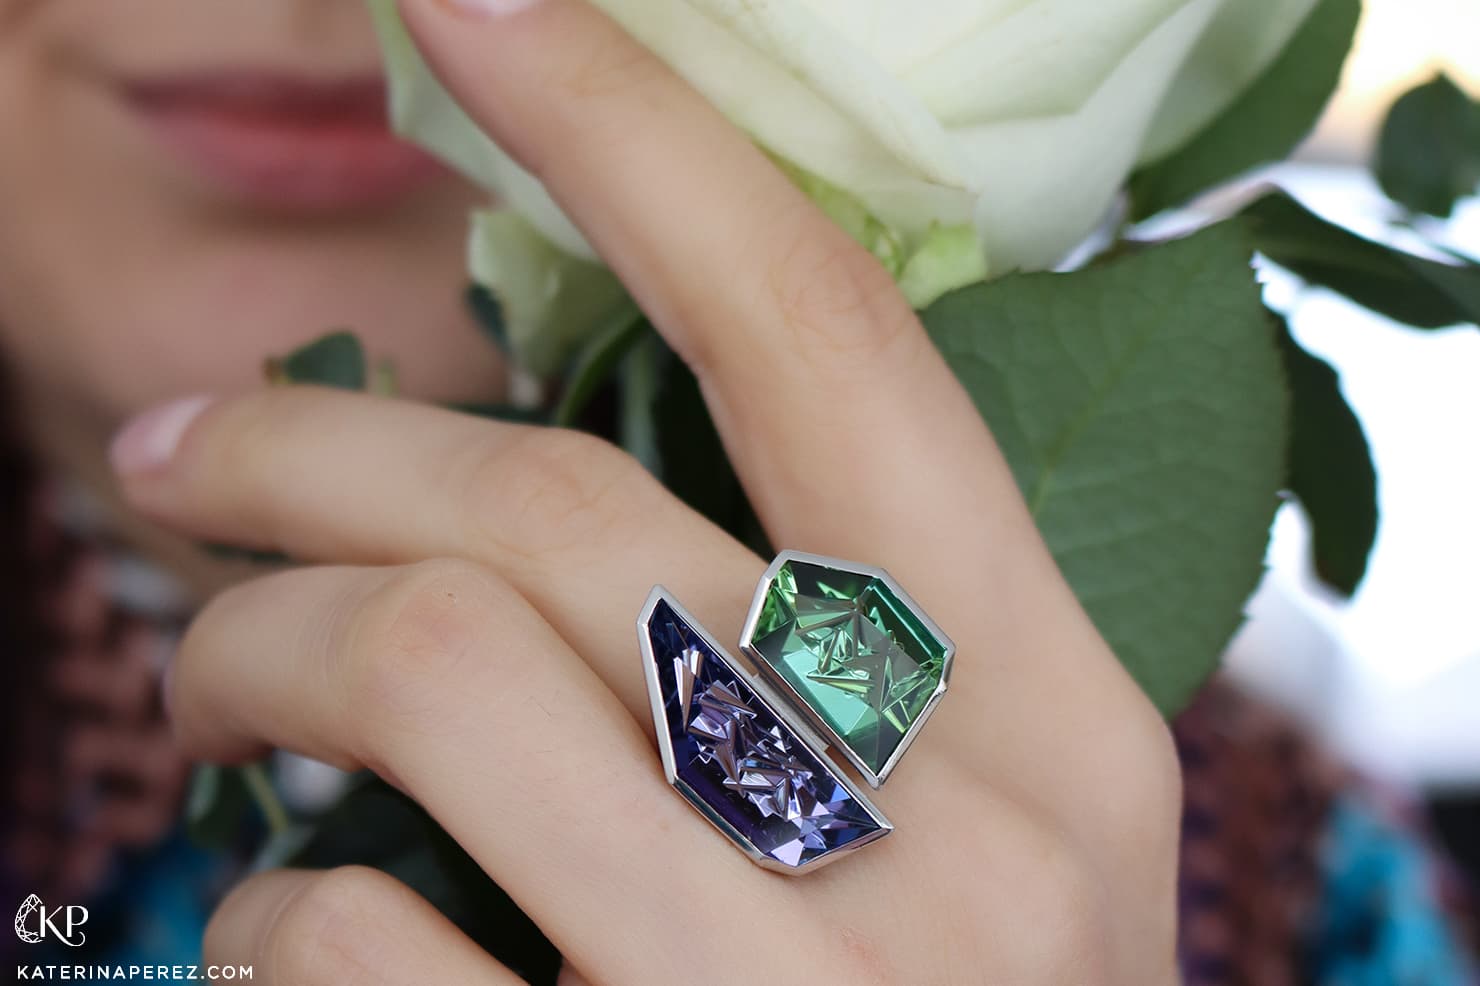 Katerina Perez wearing the Atelier Munsteiner Ensemble Playing ring with a fancy-cut tourmaline and tanzanite in platinum